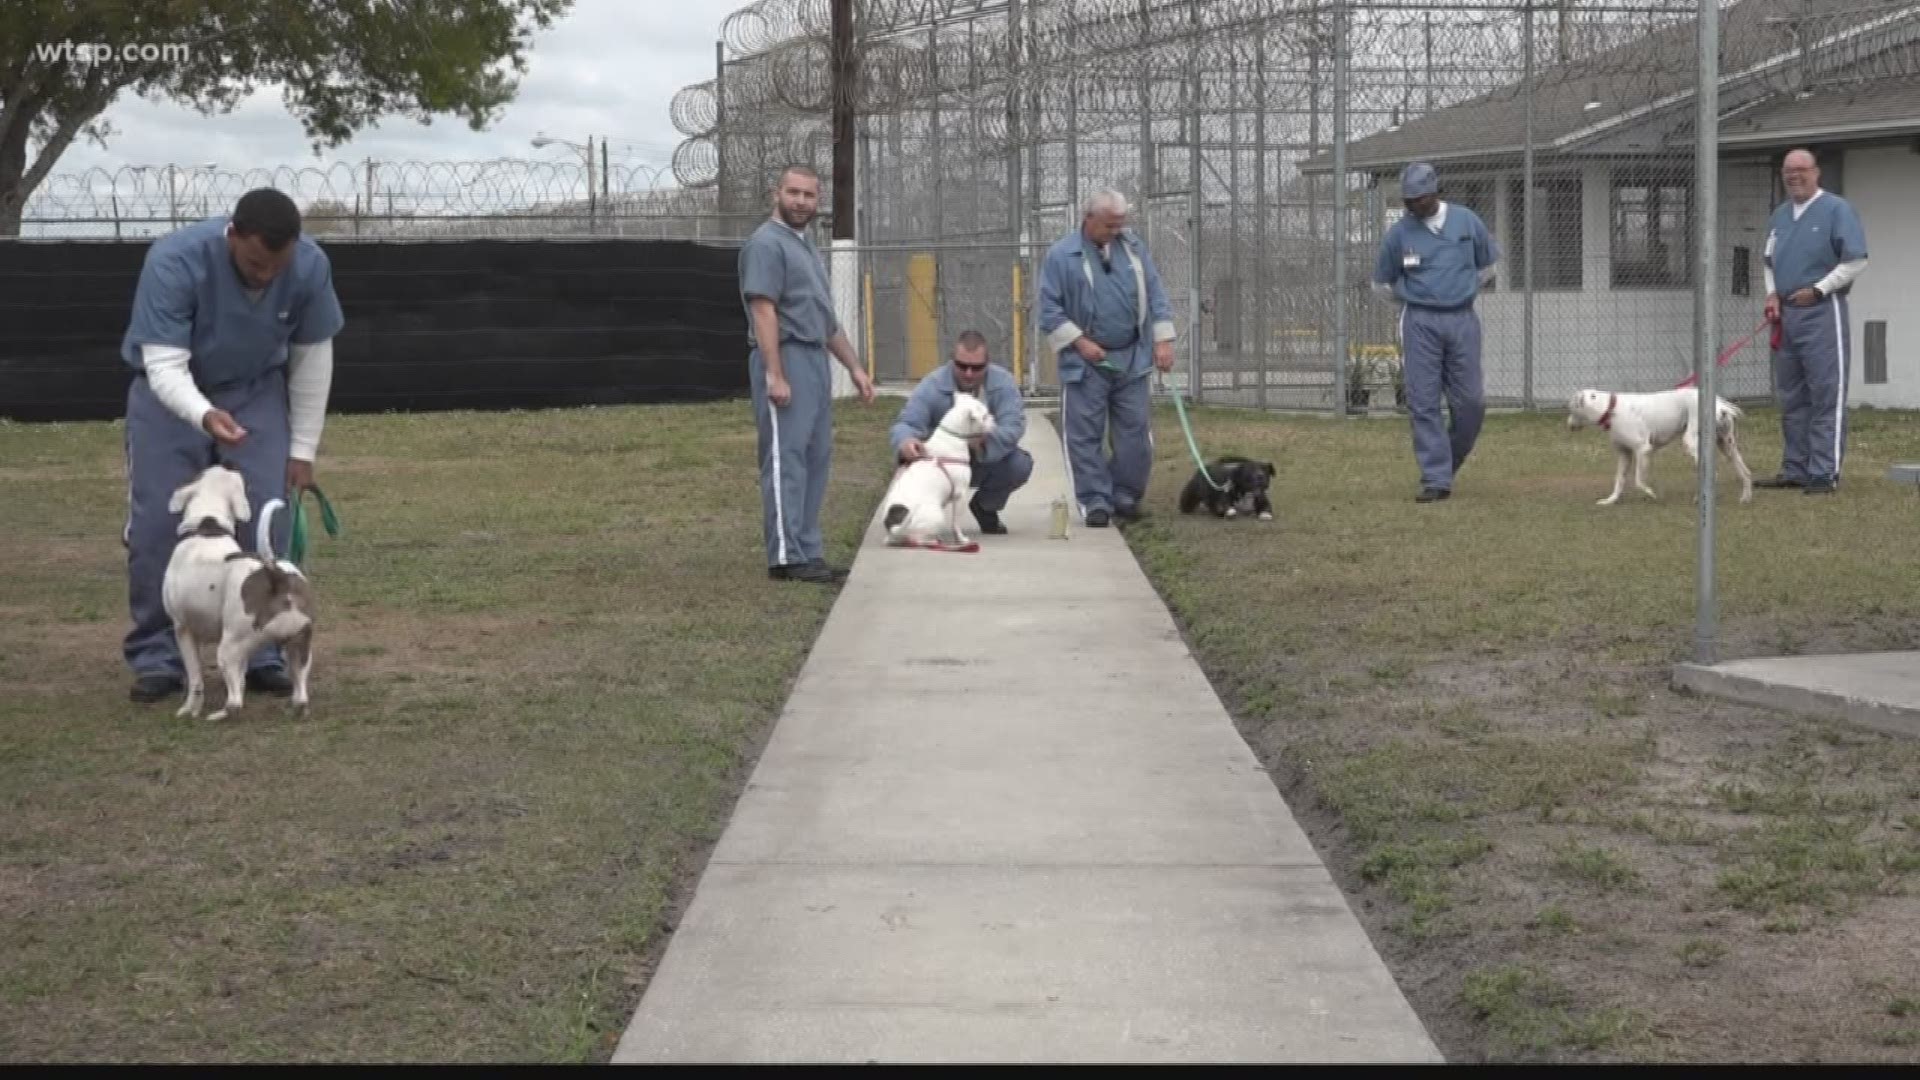 The eight-week program aims to improve inmate life and prepare dogs for adoption.